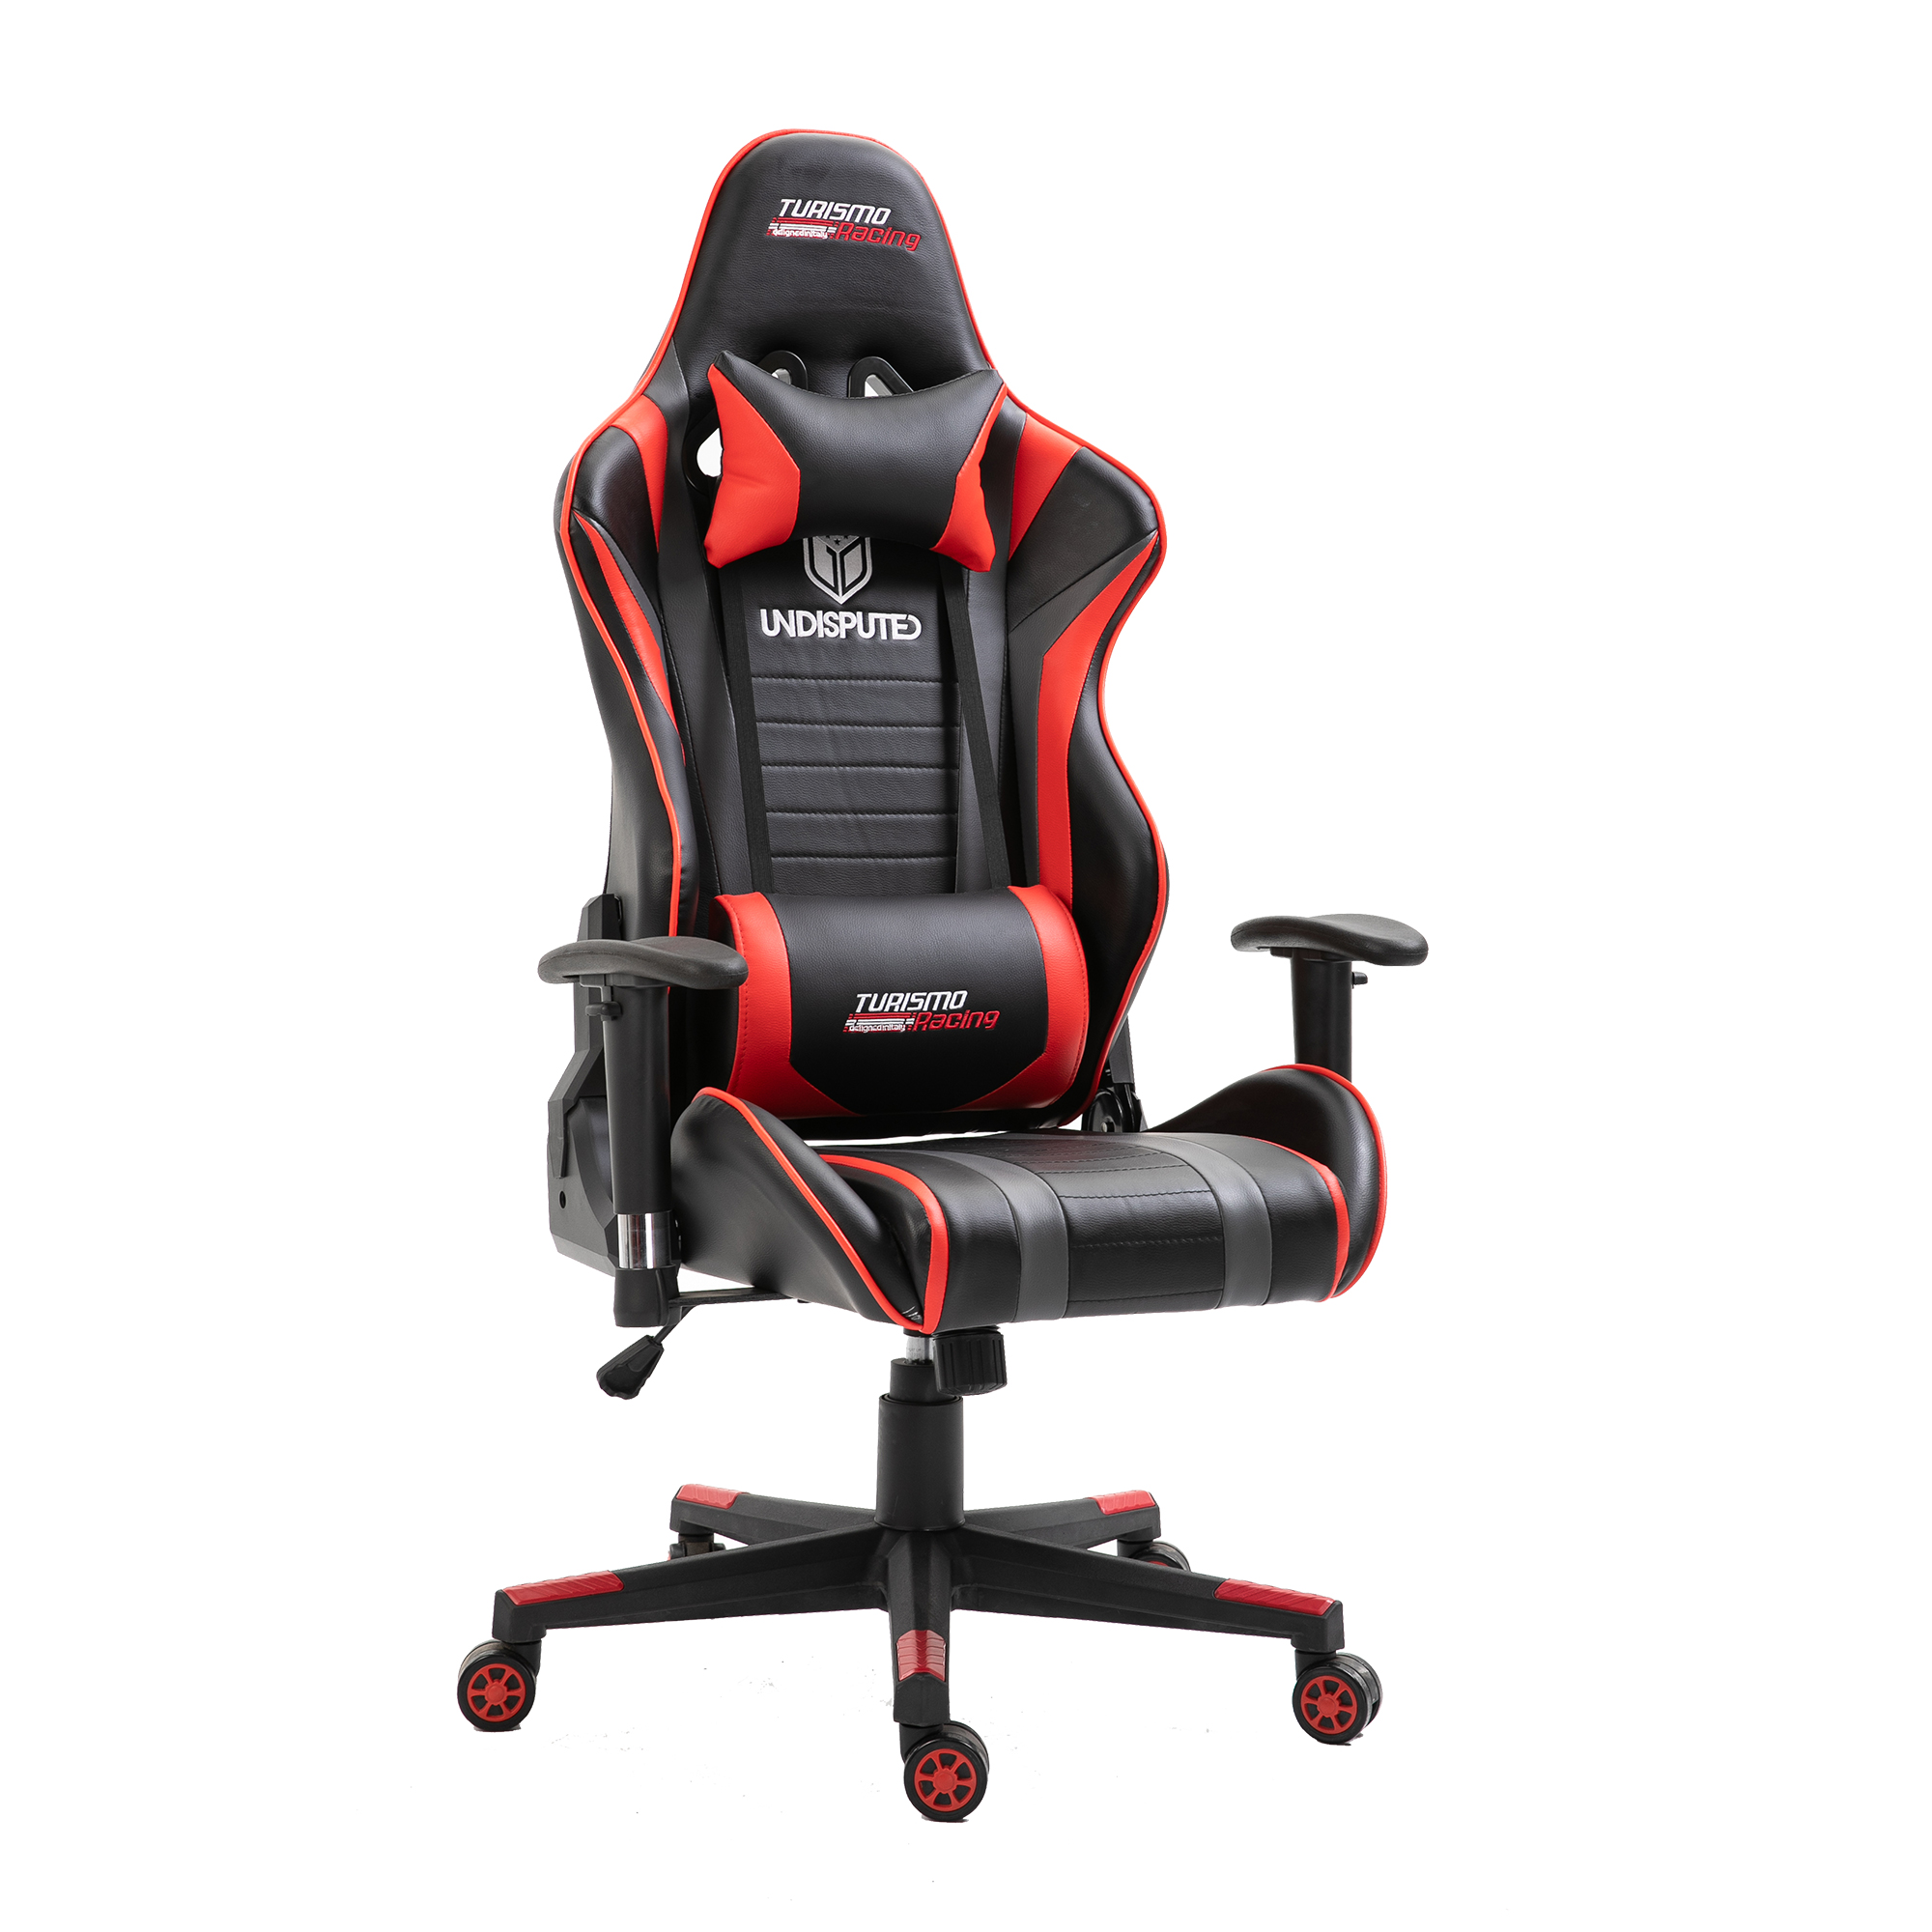 China wholesale Typhoon Gaming Chair Factory –  High quality Ergonomic Silla Gamer luxury swivel cheap pu leather racing home PC computer office chair gaming chair – ANJI JIFANG